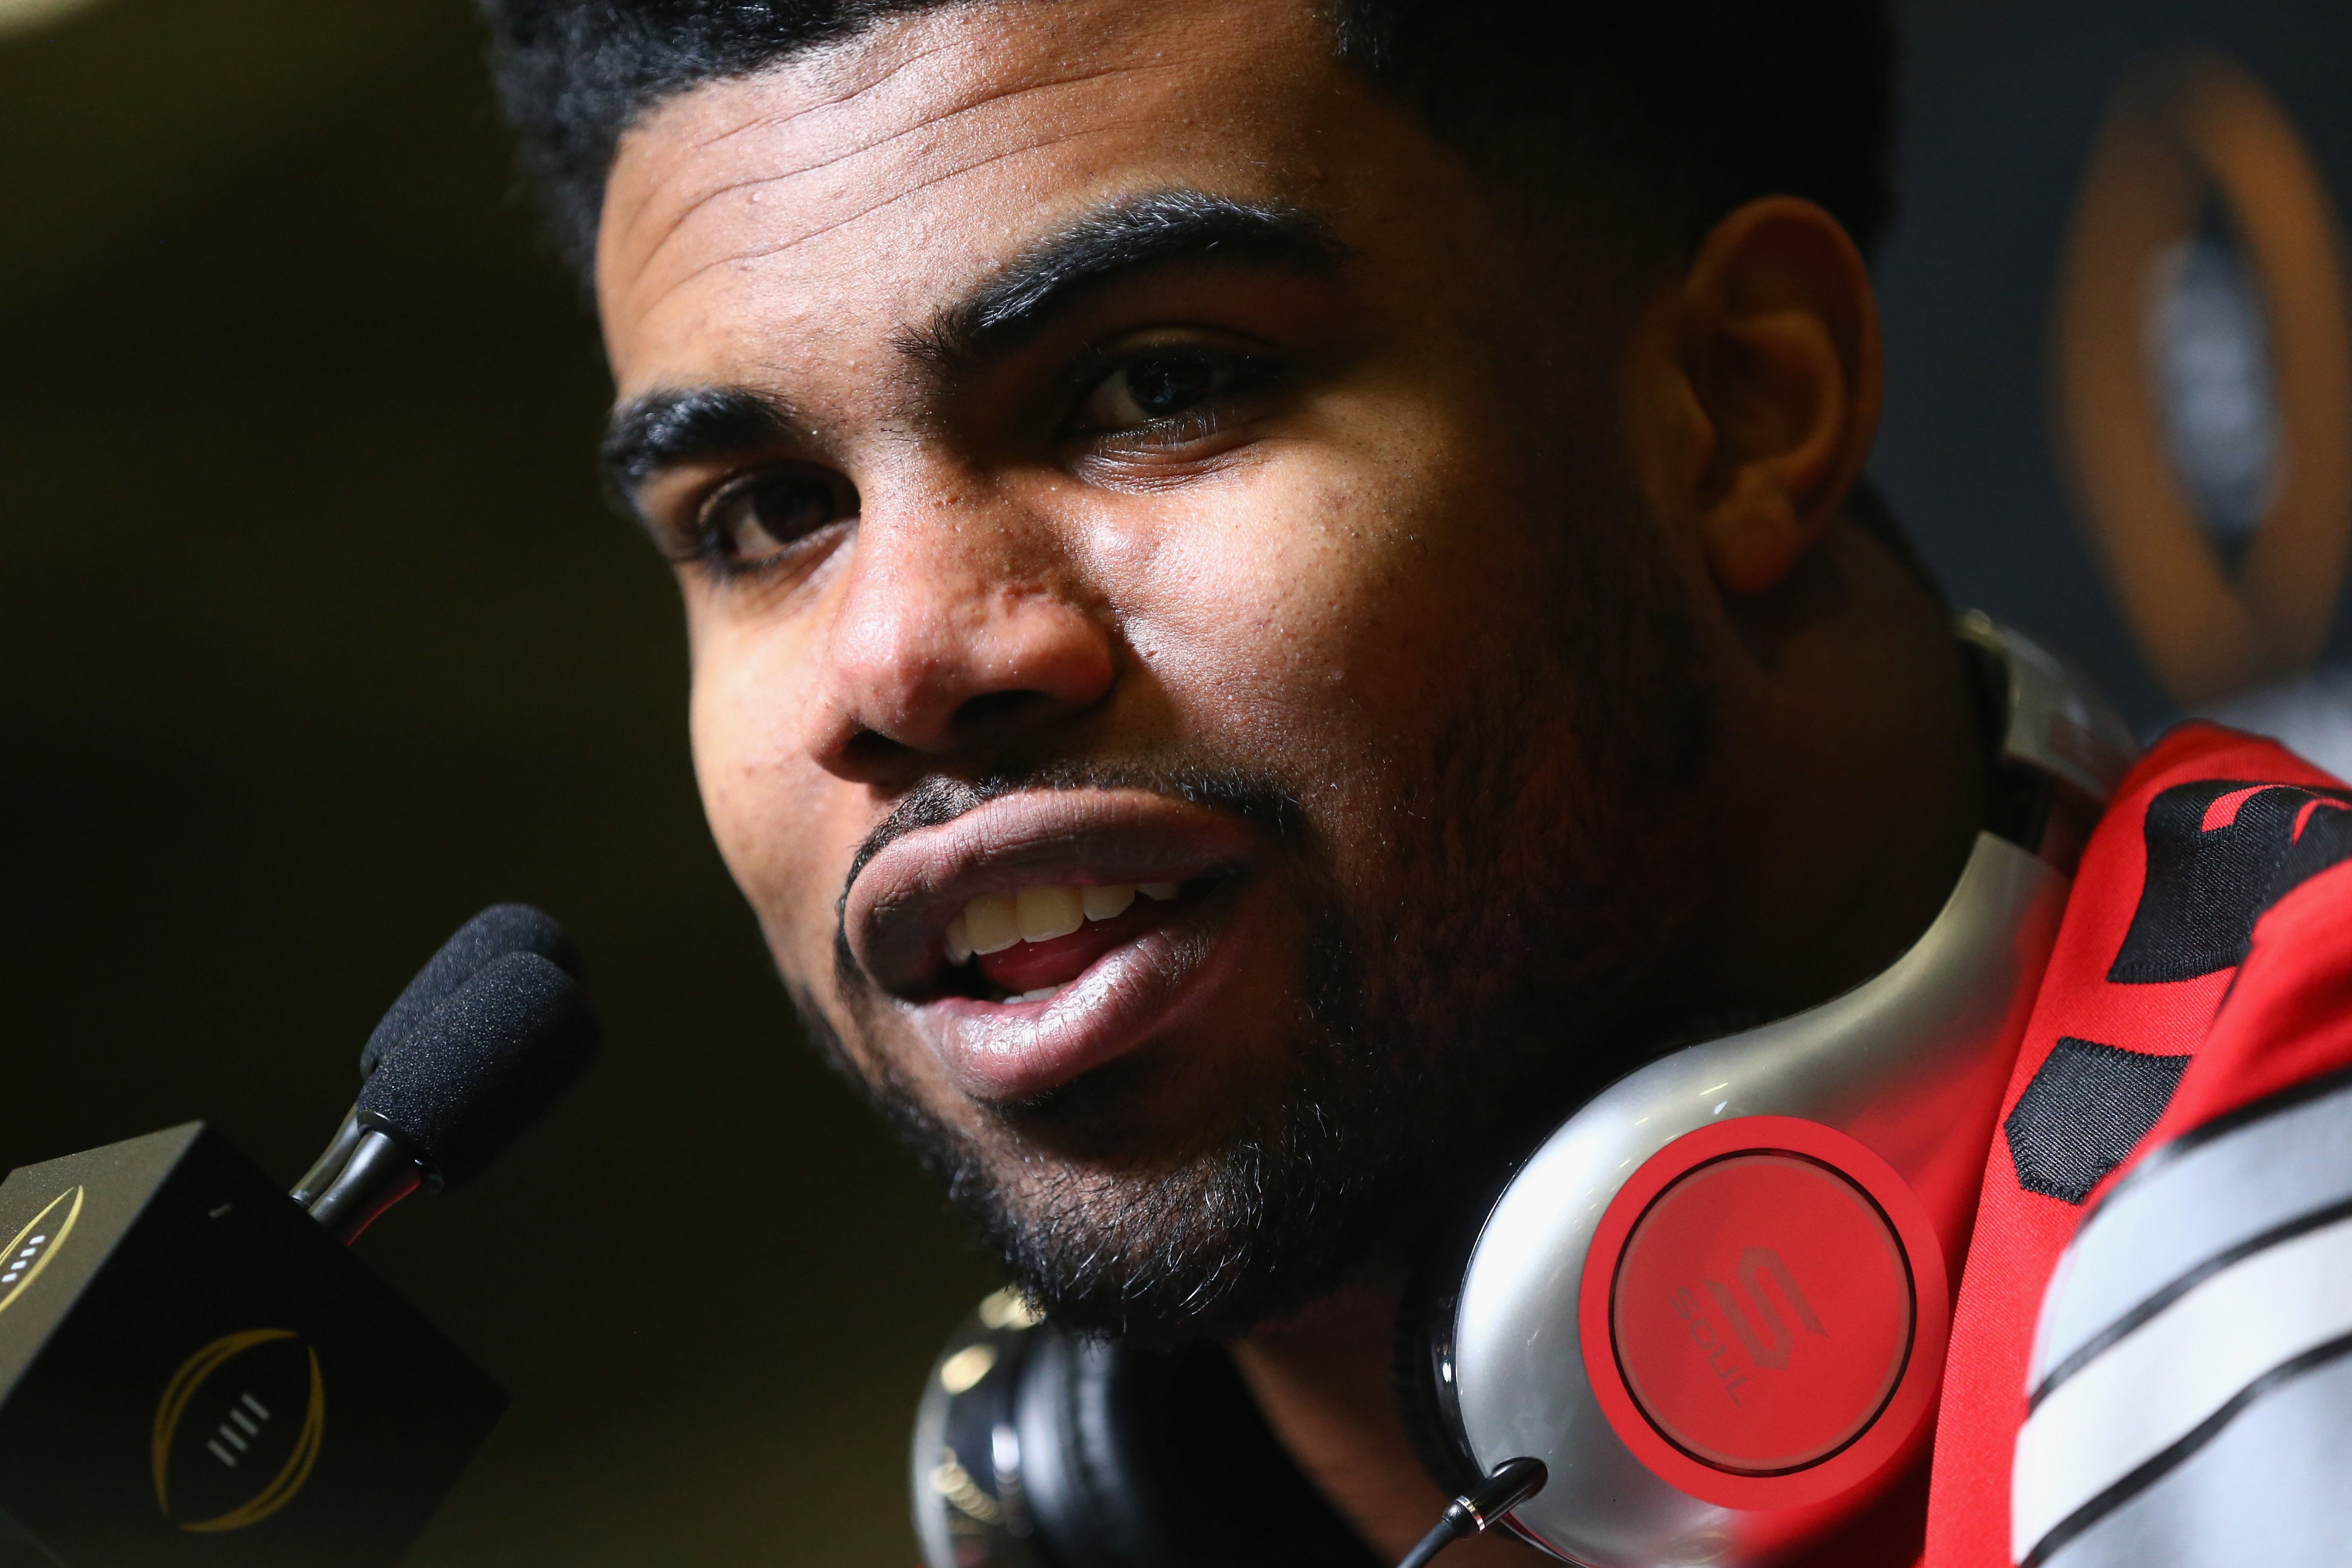 Ezekiel Elliott #15 of the Ohio State Buckeyes talks with media during Media Day for the College Football Playoff National Championship at Dallas Convention Center on January 10, 2015 in Dallas, Texas. (Ronald Martinez—Getty Images)